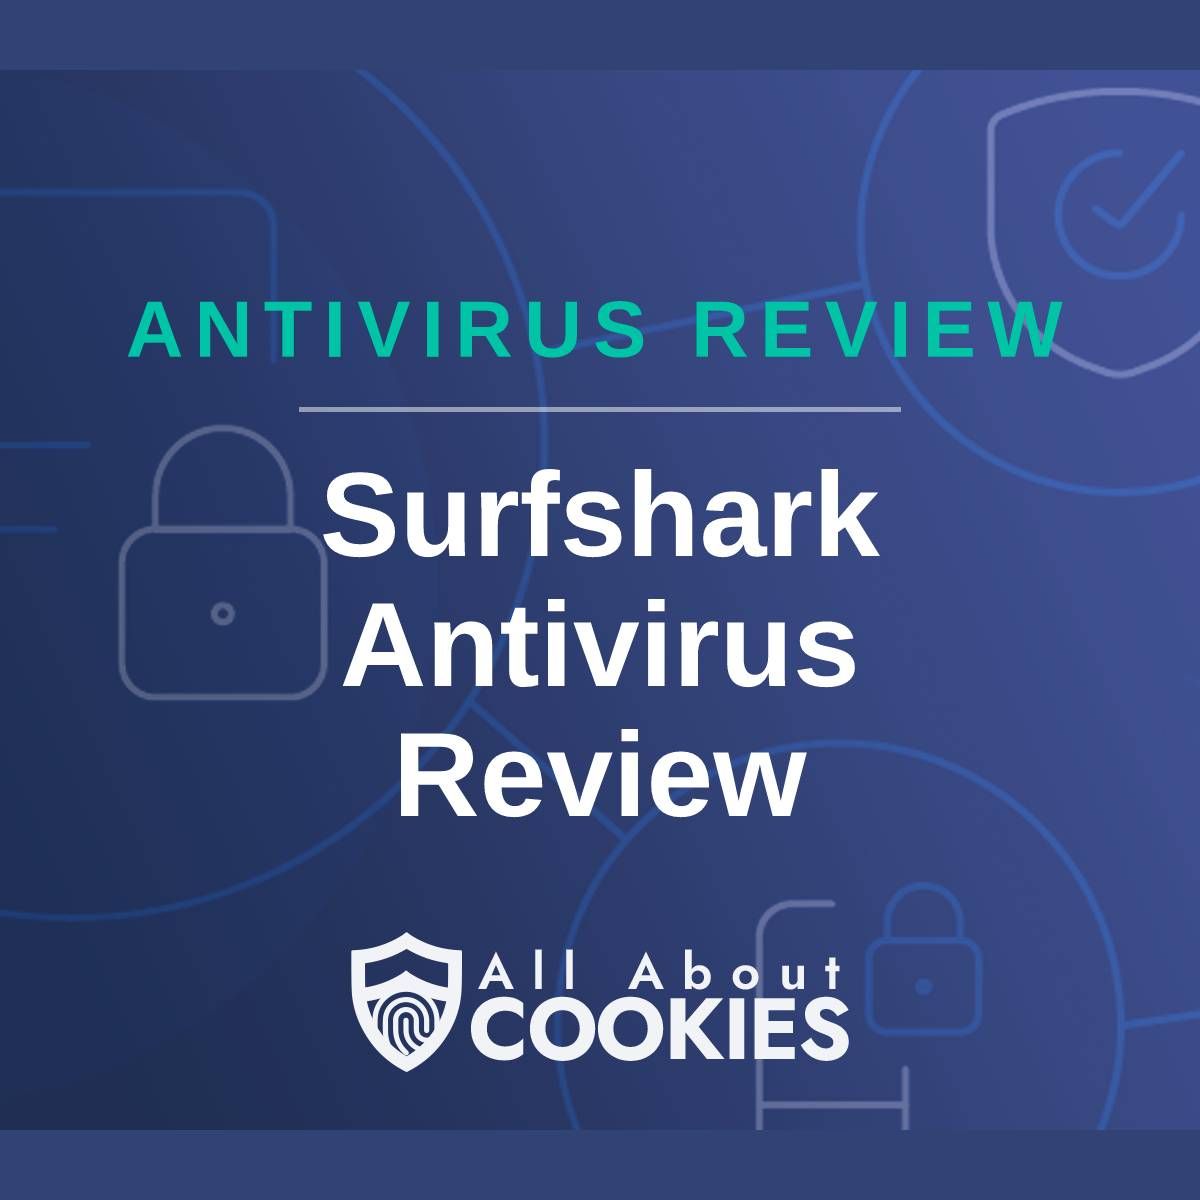 A blue background with images of locks and shields with the text &quot;Antivirus Review Surfshark Antivirus Review&quot; and the All About Cookies logo. 